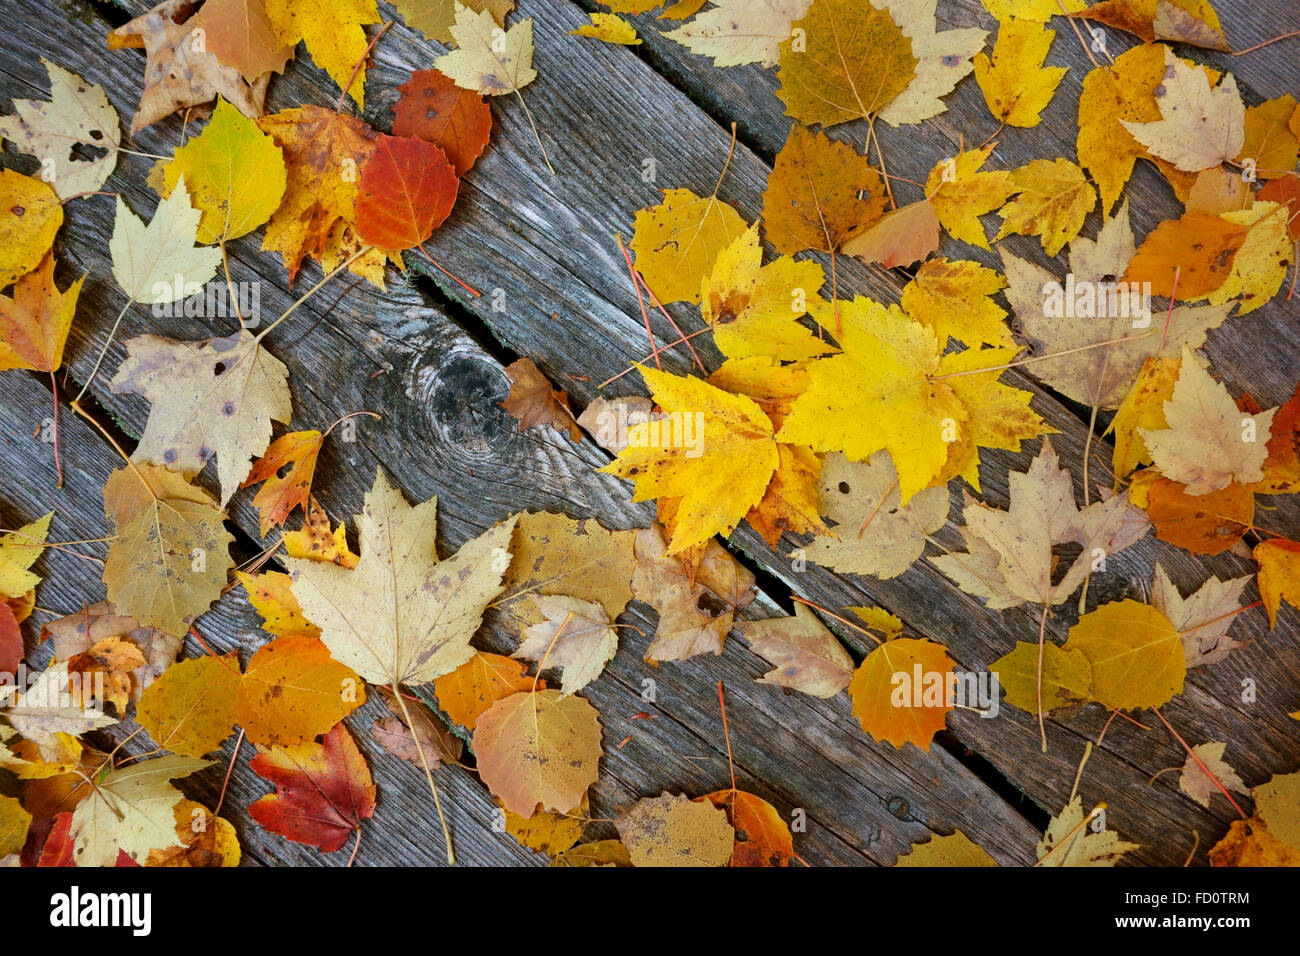 Autumn maple leaves scattered on old wood Stock Photo